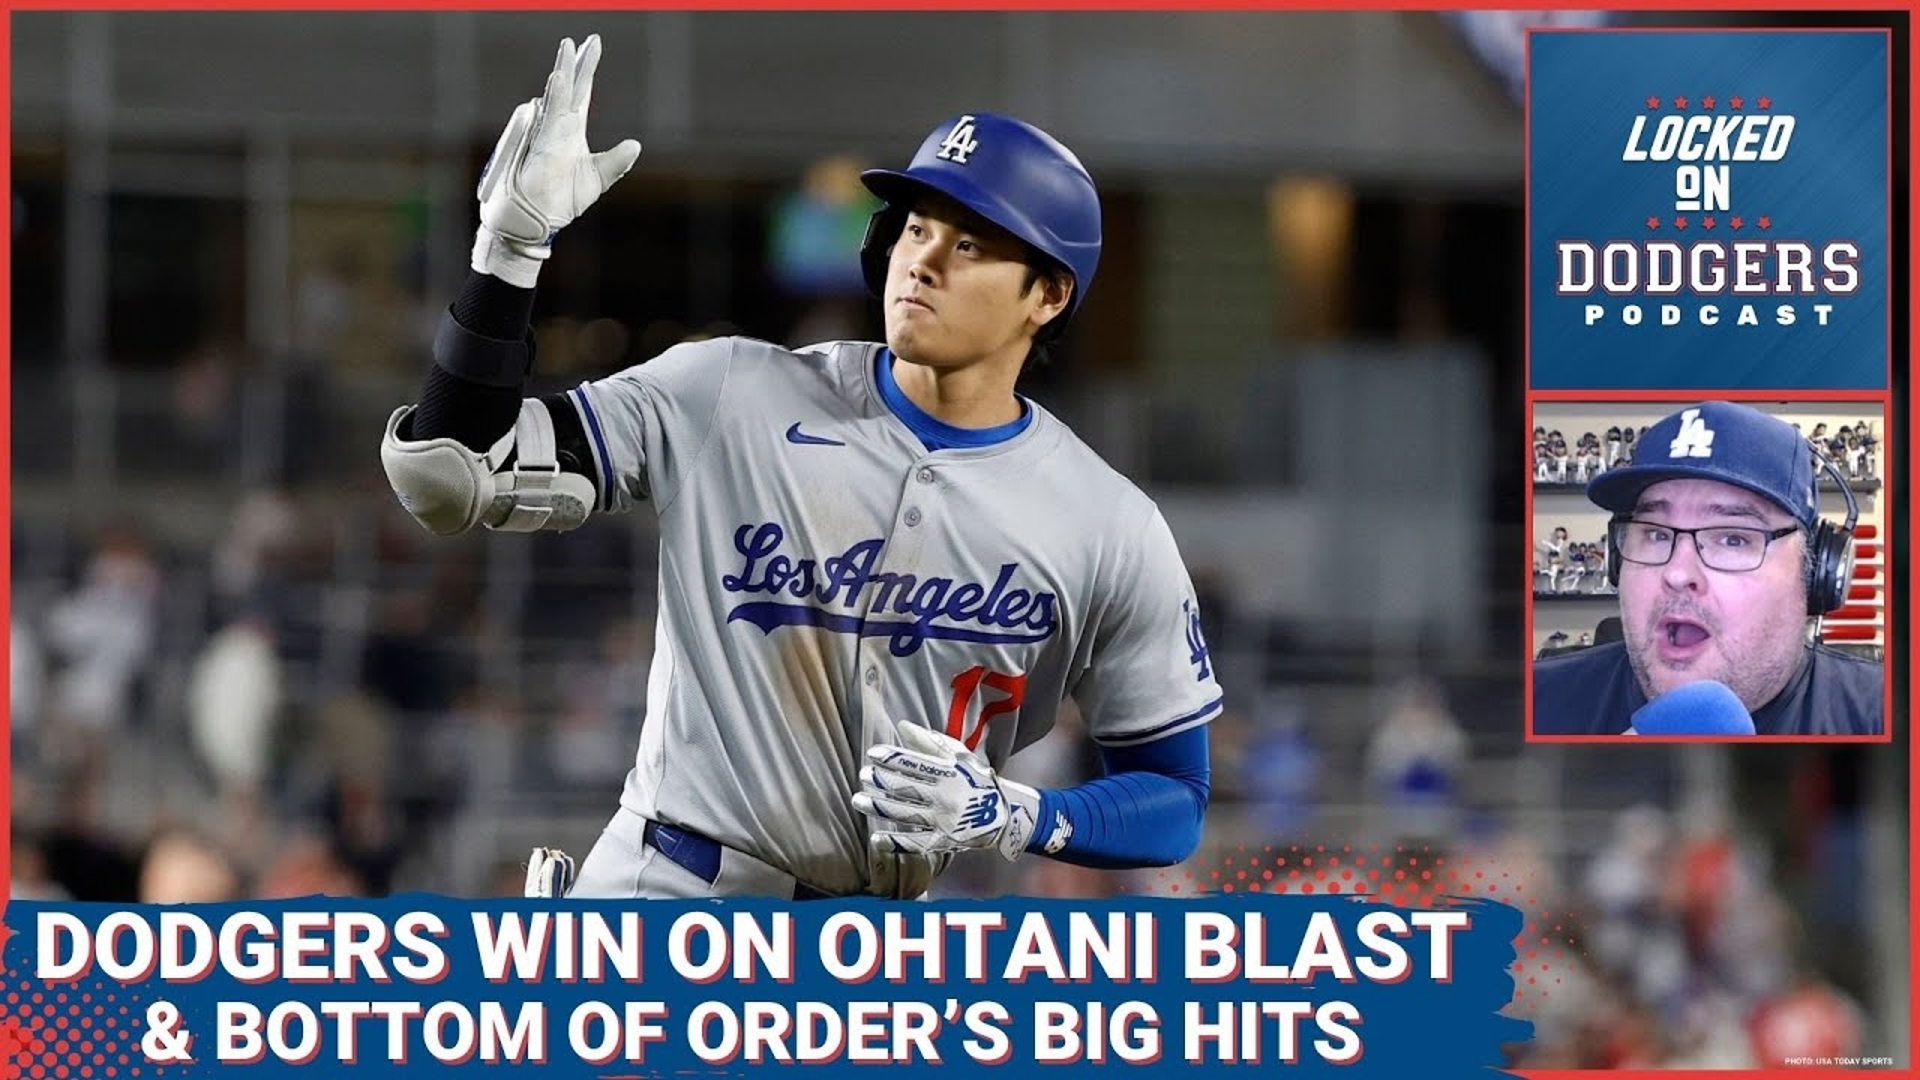 The Los Angeles Dodgers beat the Washington Nationals, 4-1, on Tuesday, in a game highlighted by the most impressive home run Shohei Ohtani has hit in LA.